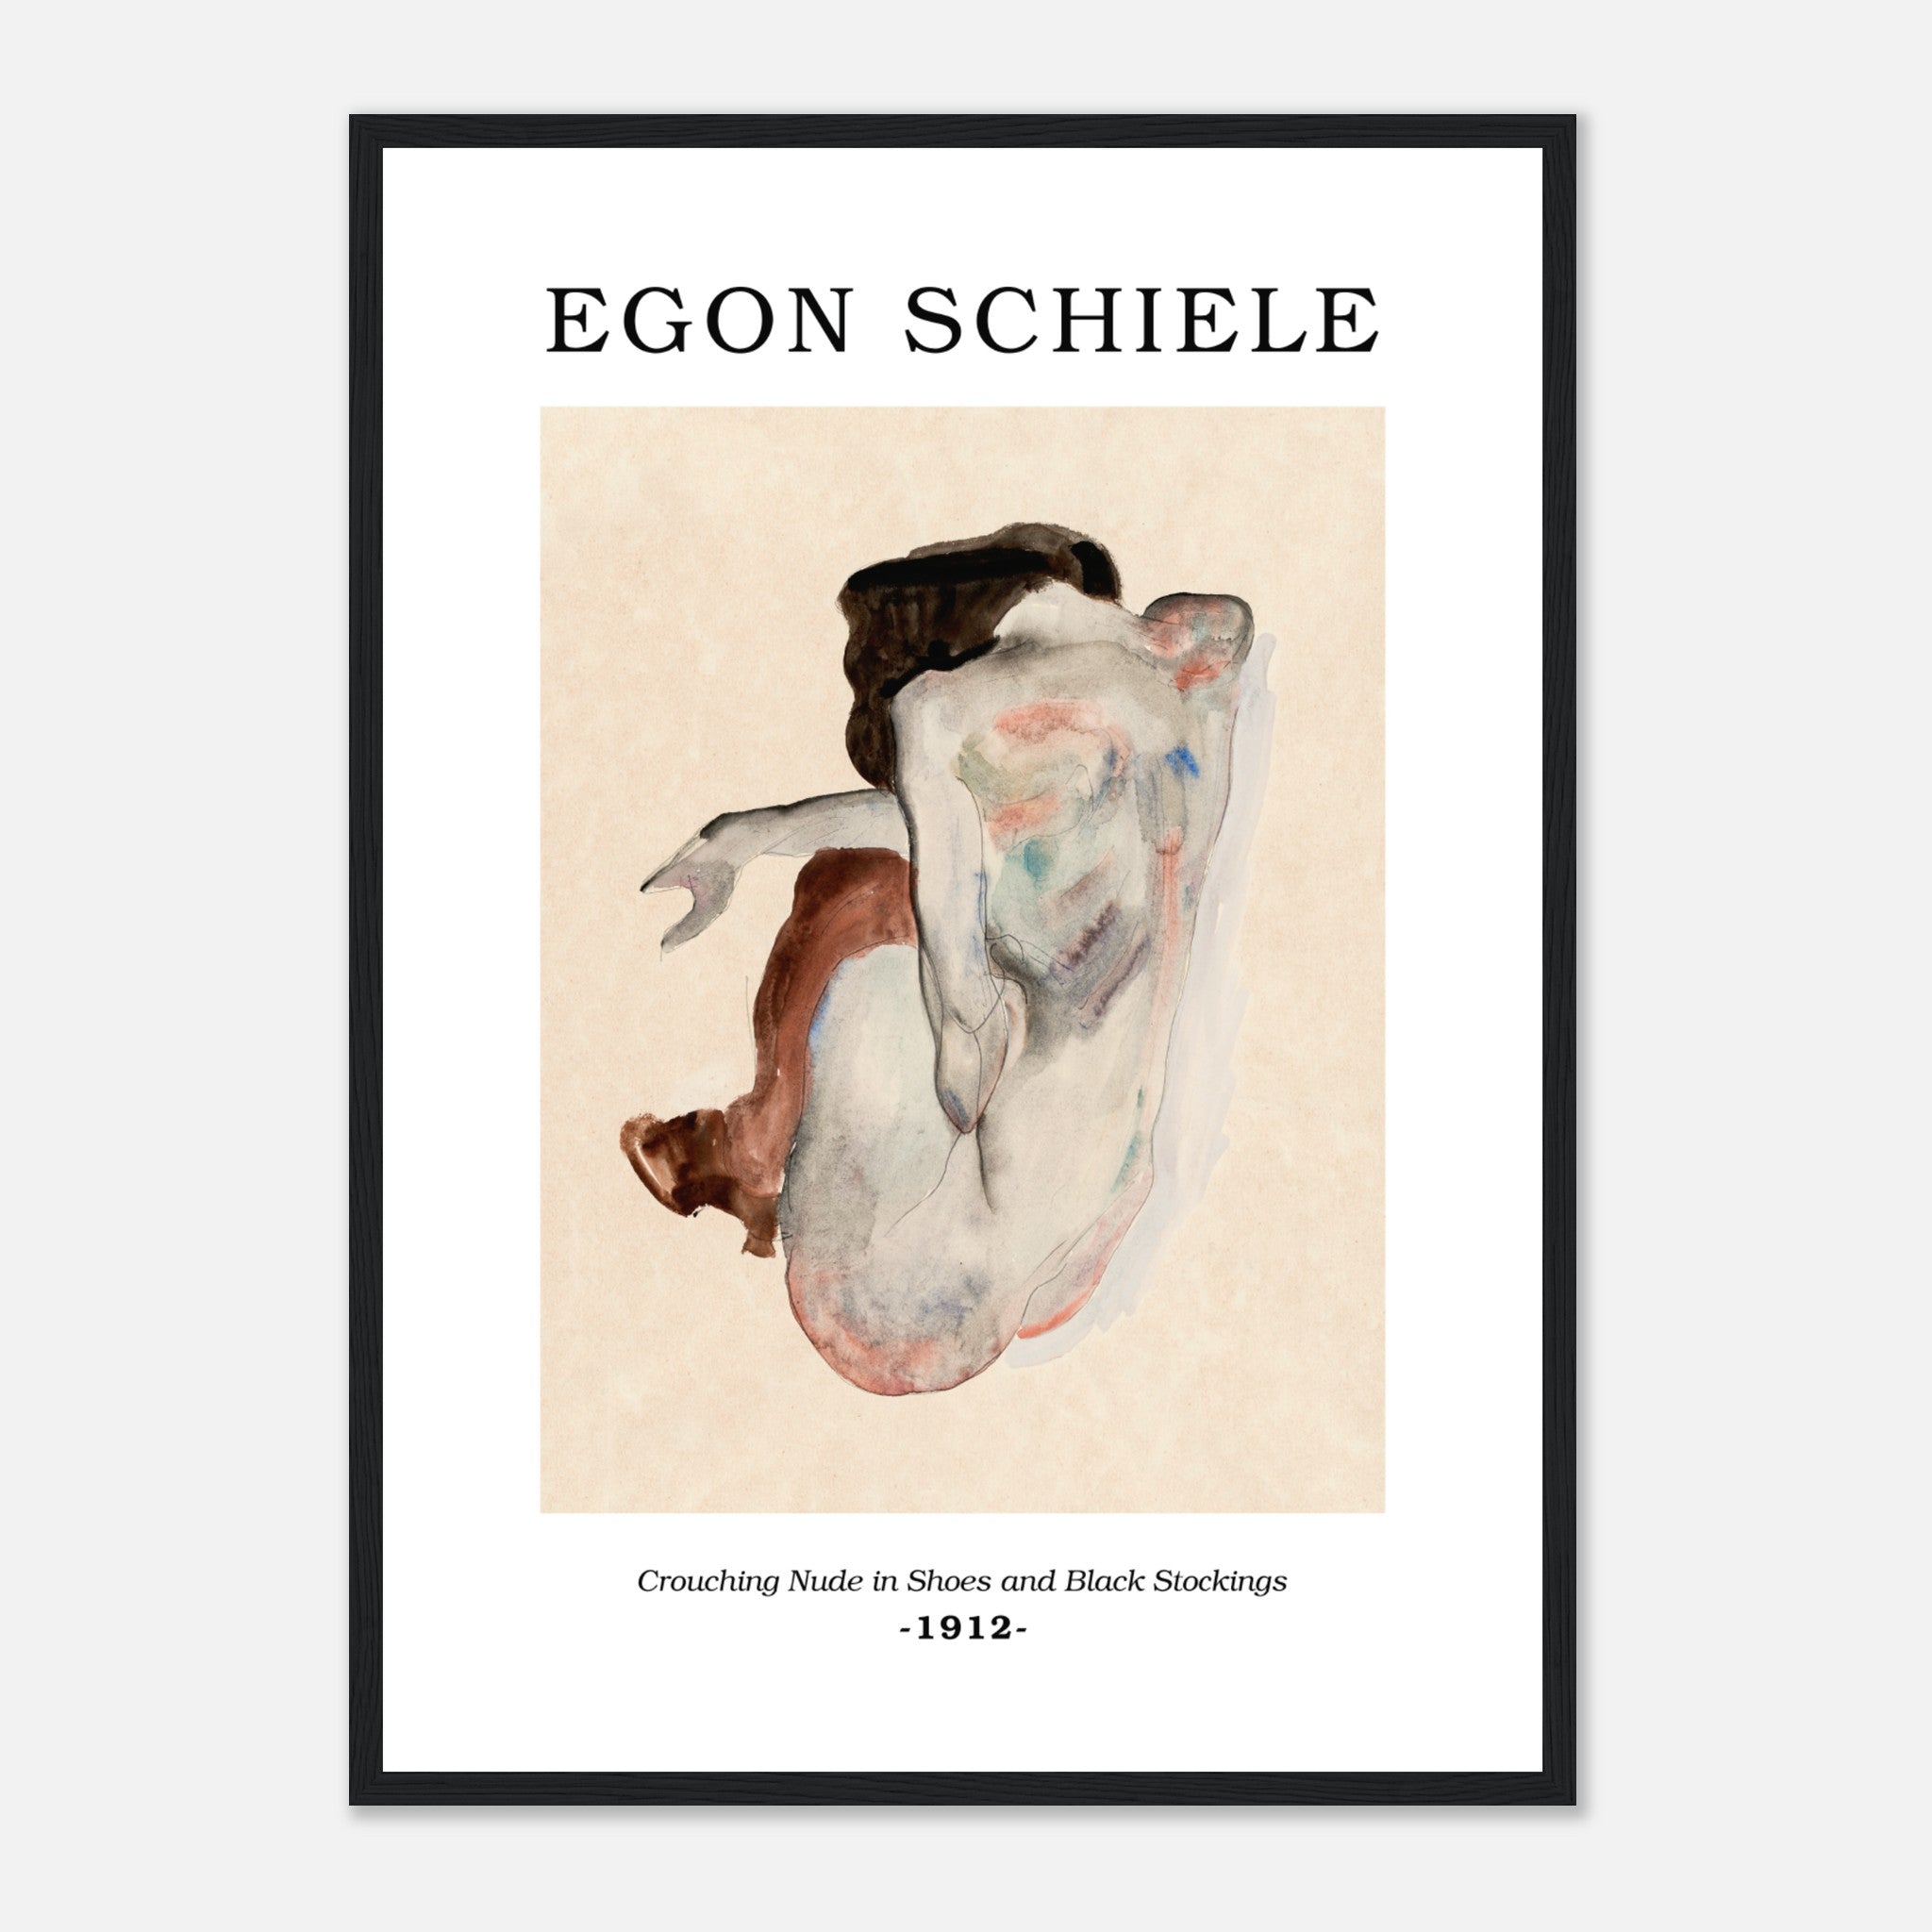 Naked lady by Egon Schiele Poster